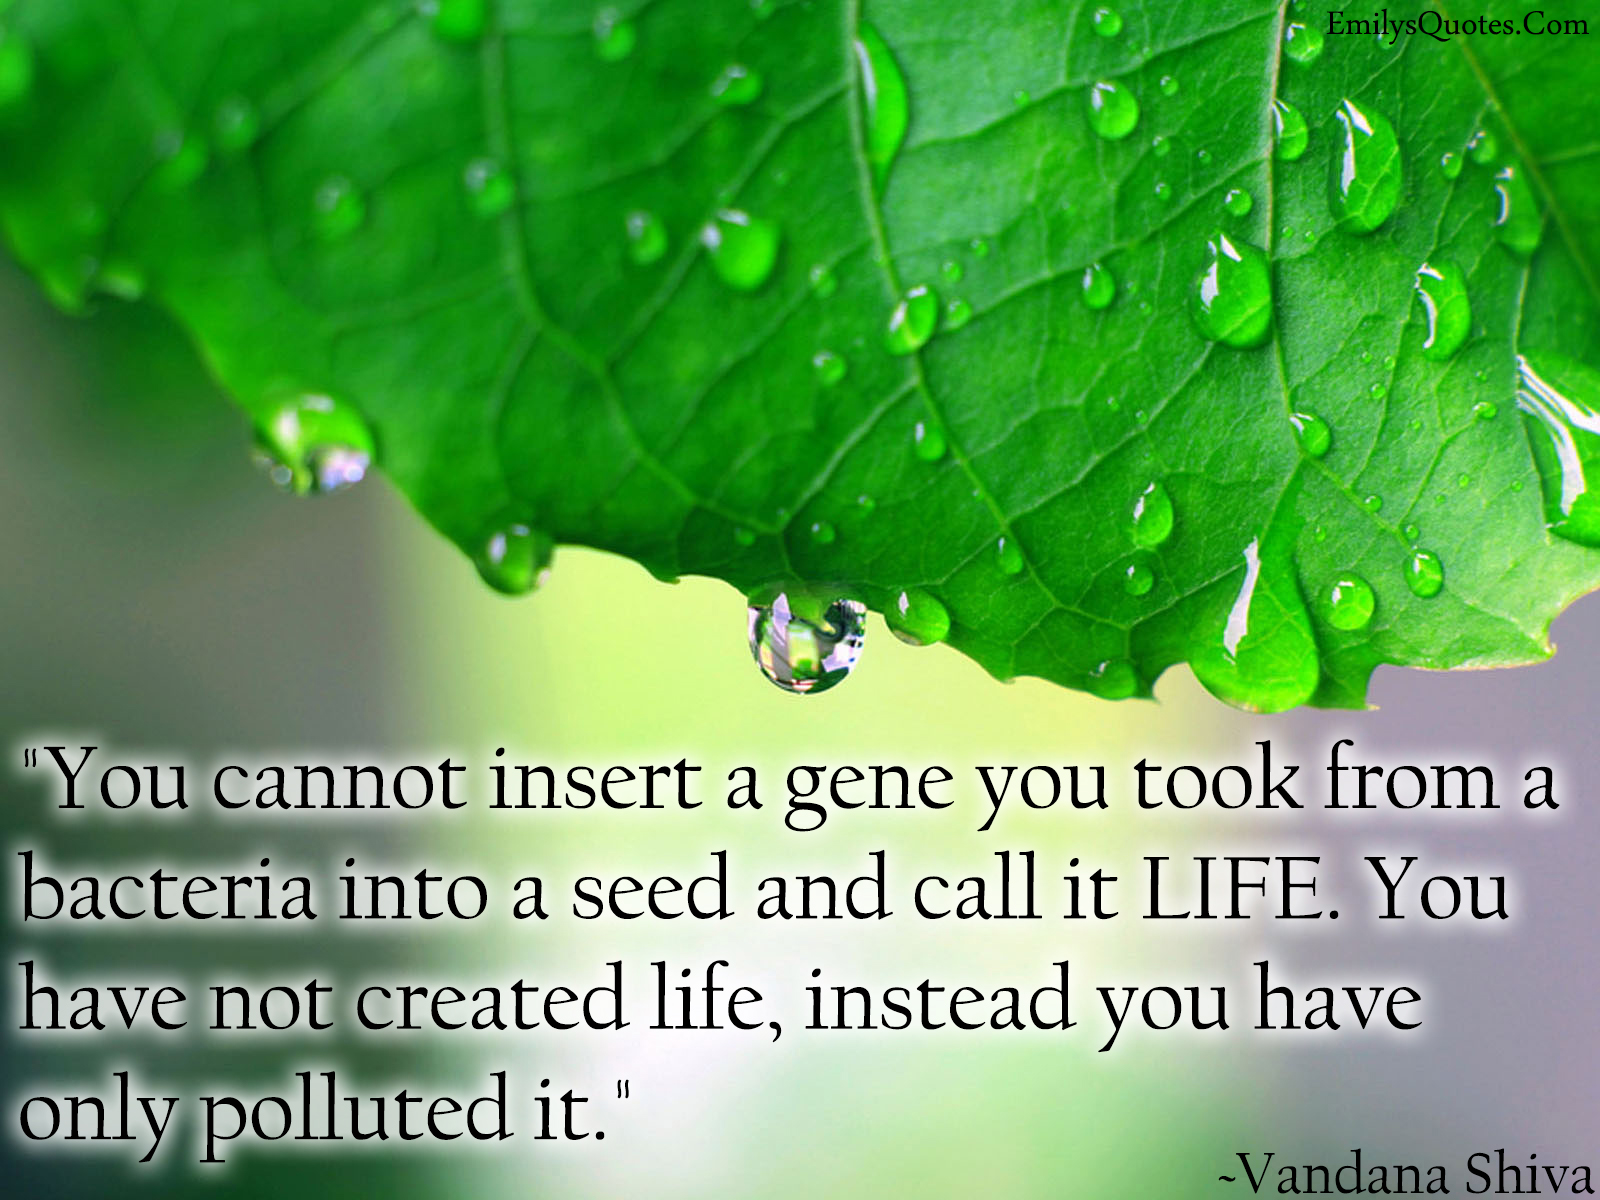 You cannot insert a gene you took from a bacteria into a seed and call it LIFE. You have not created life, instead you have only polluted it